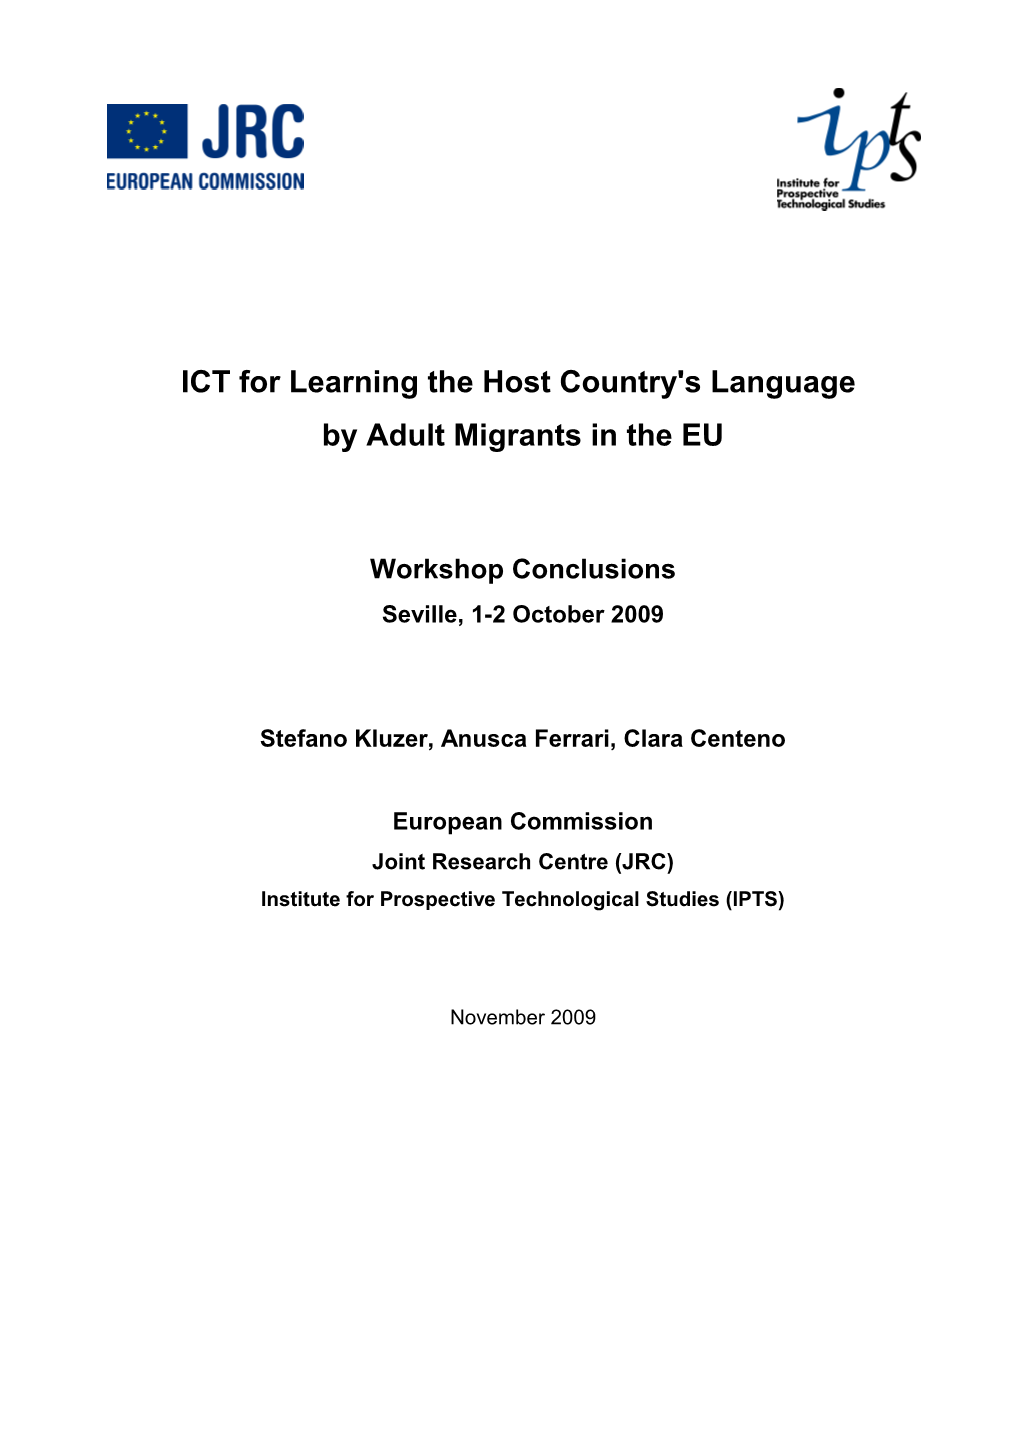 ICT for Learning the Host Country's Language